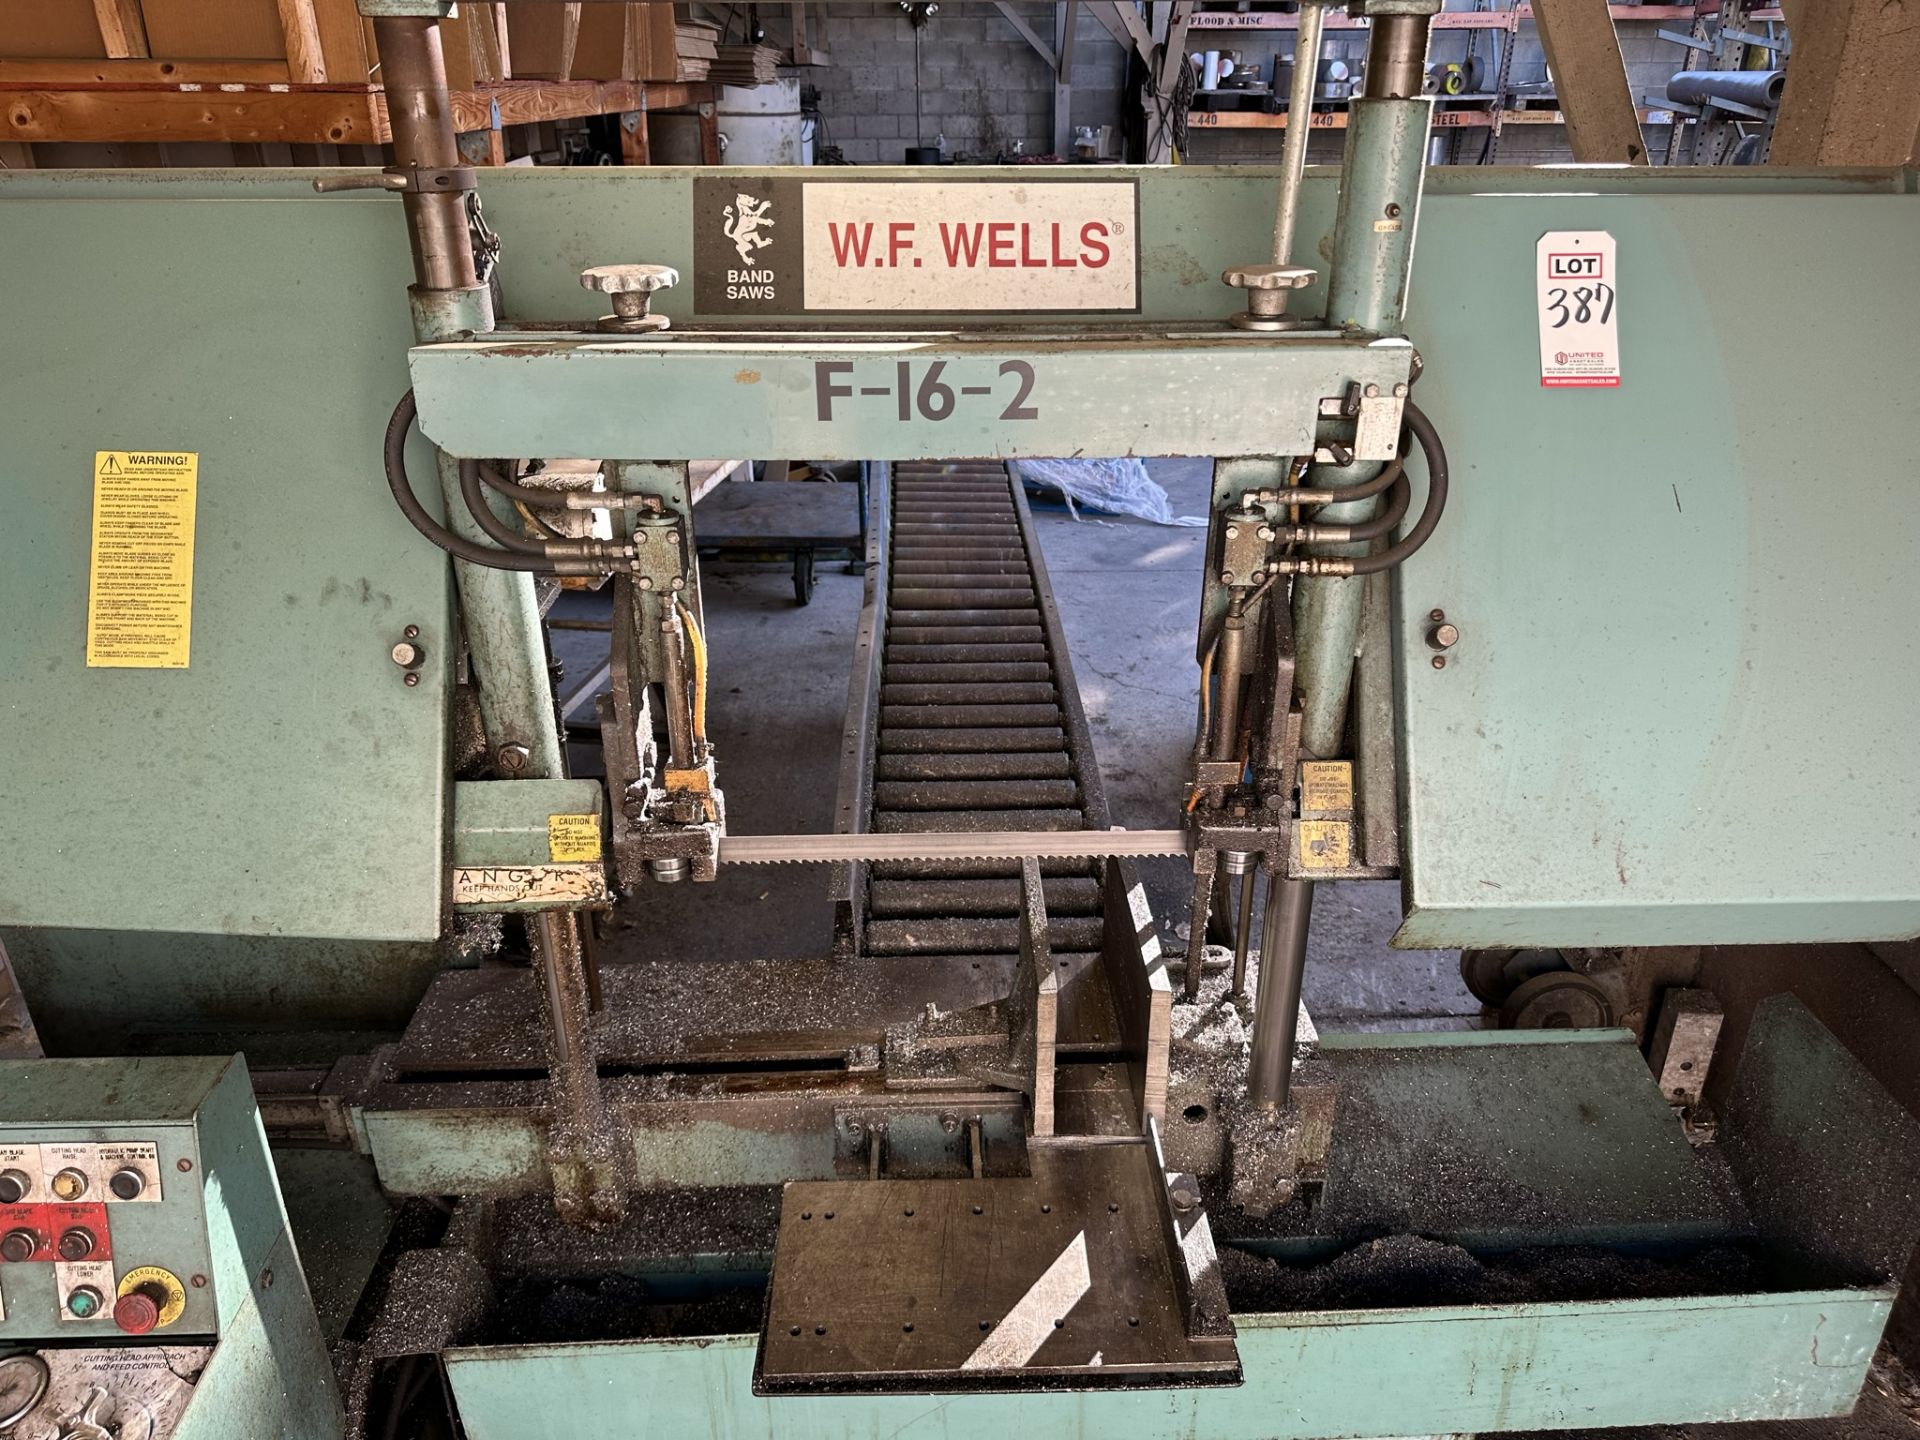 W.F. WELLS HORIZONTAL BAND SAW, MODEL F-16-2, S/N A3480-F11819, W/ 10' OF 14" ROLLER CONVEYOR - Image 2 of 7